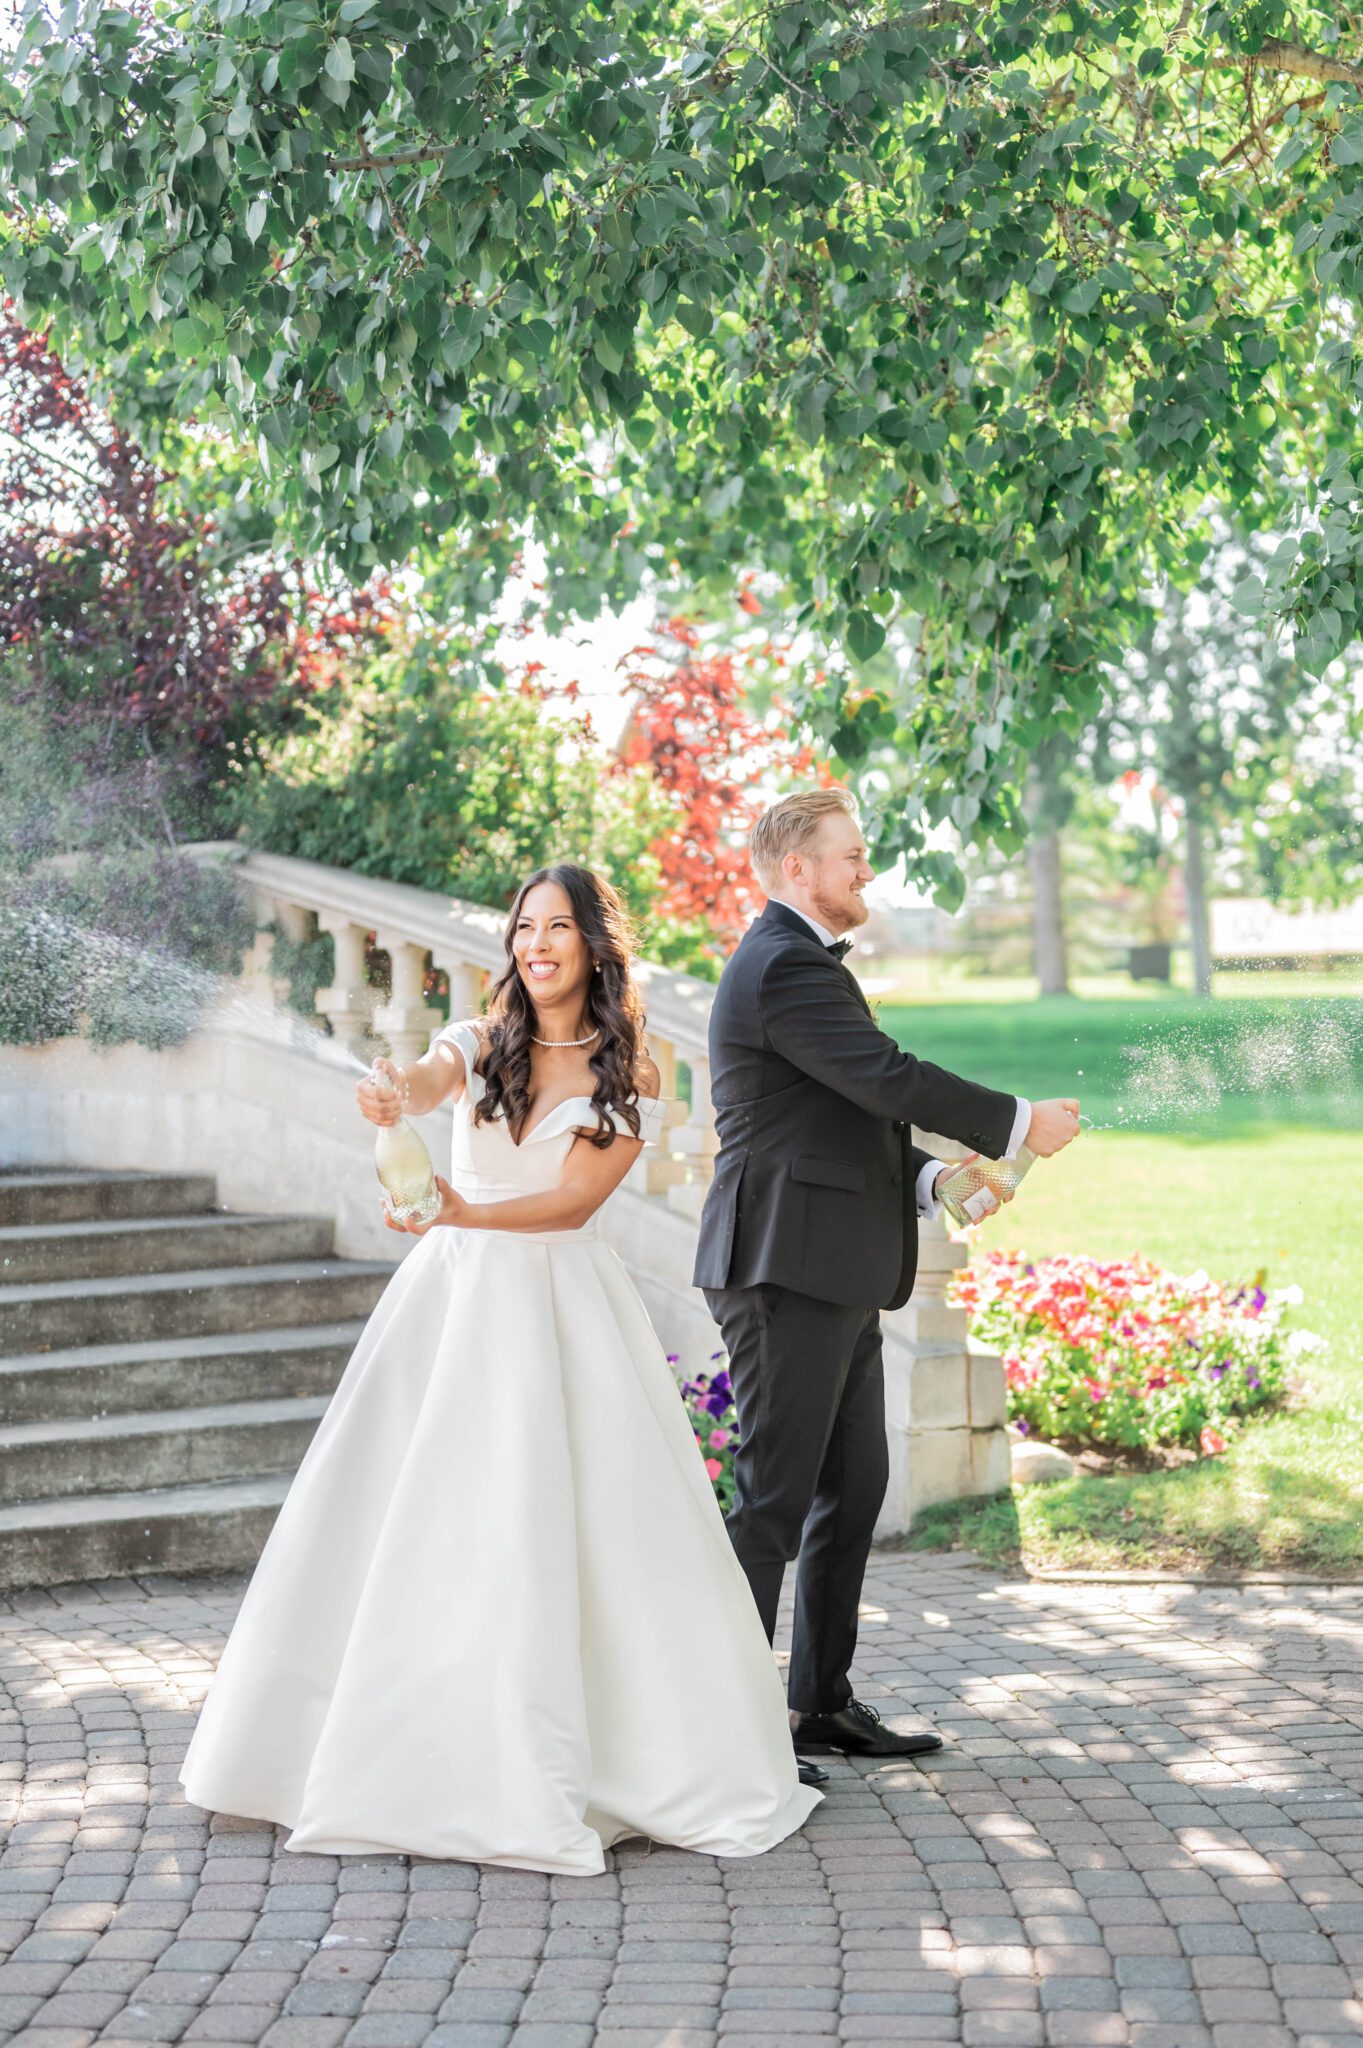 Bride and groom pop a bottle of champagne in celebration at their whimsical garden wedding in Spruce Meadows.